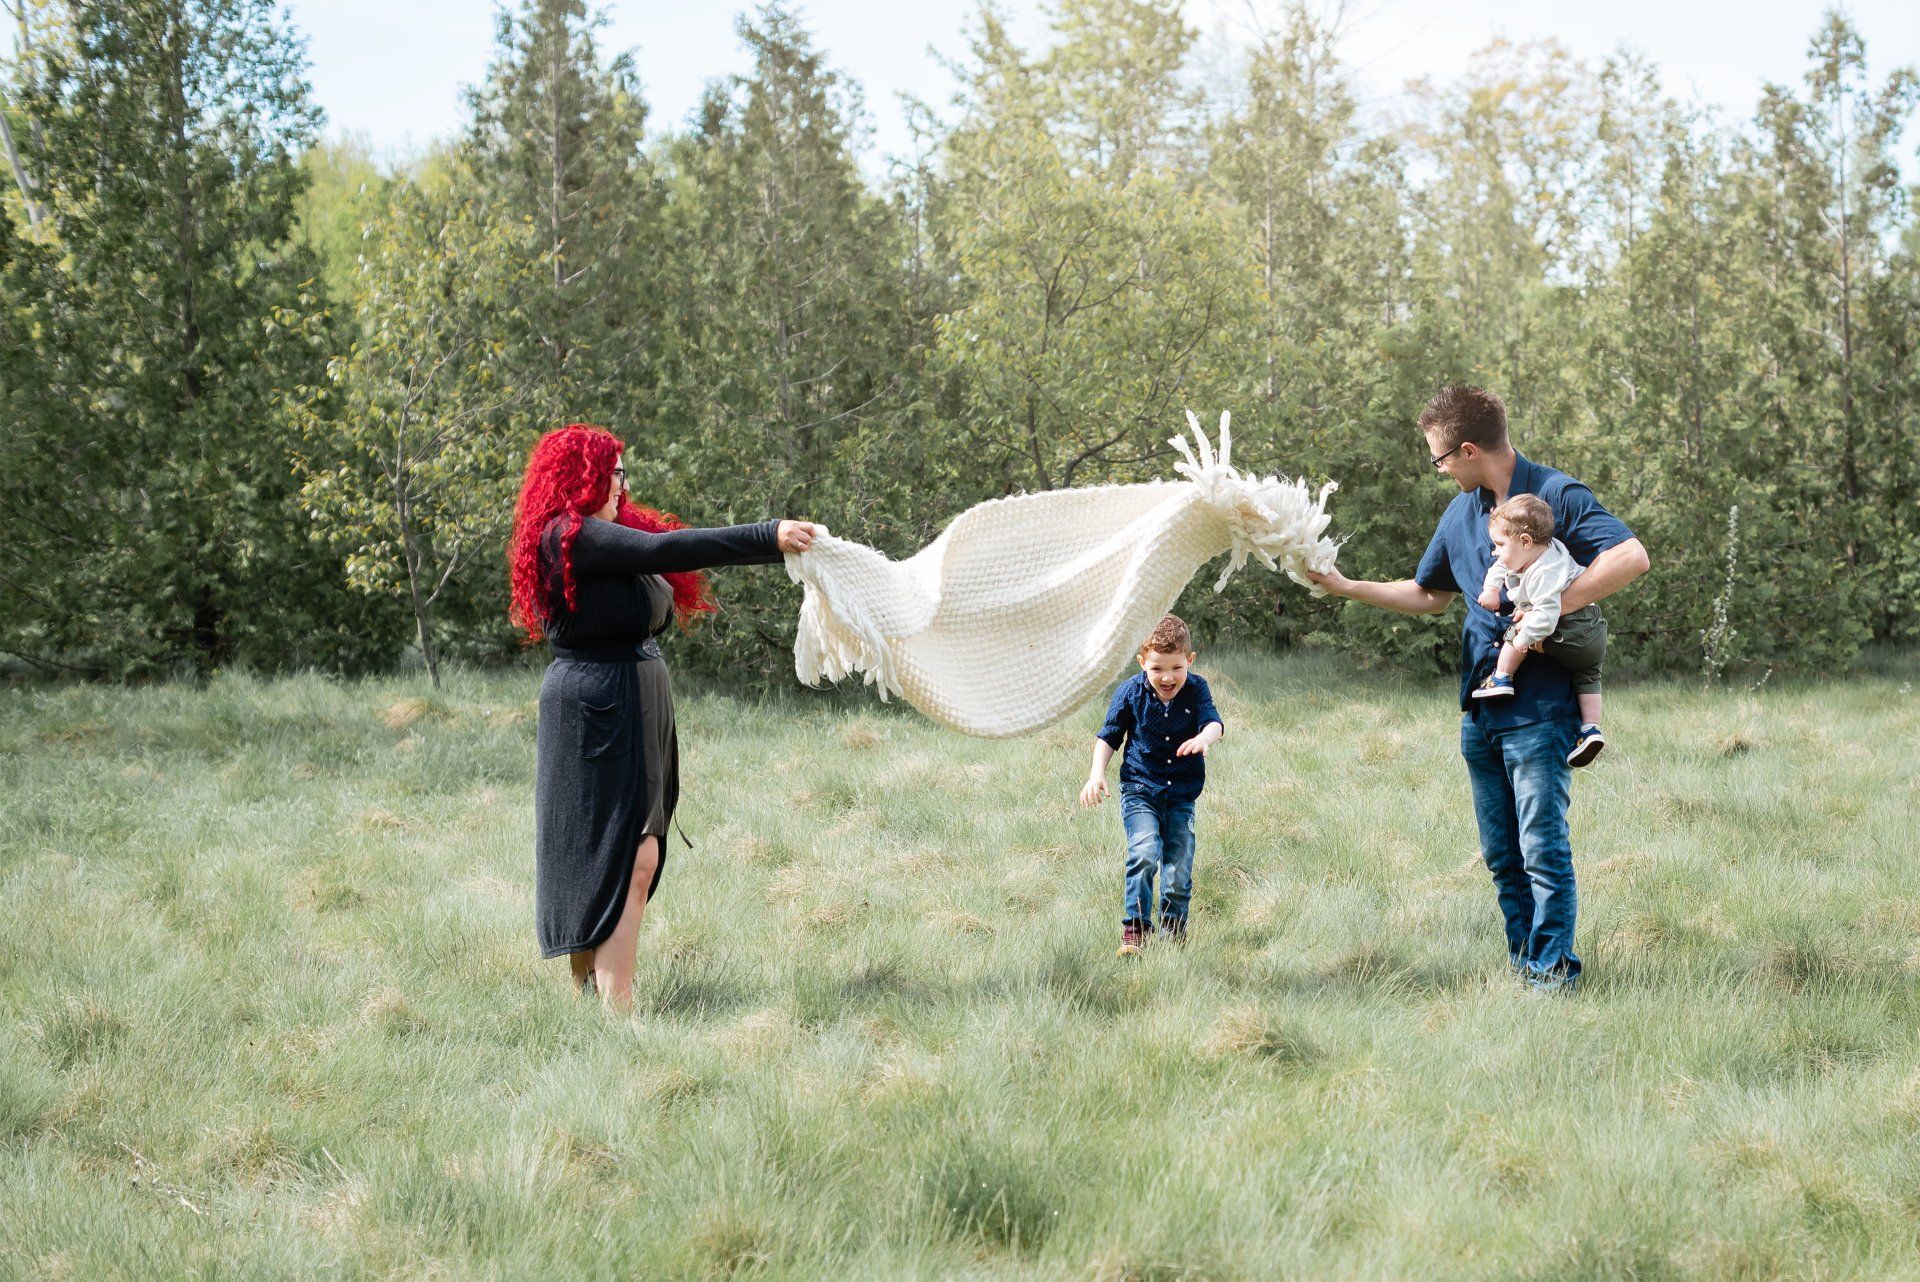 Lifestyle photograph of a family with two children playing in a grassy field